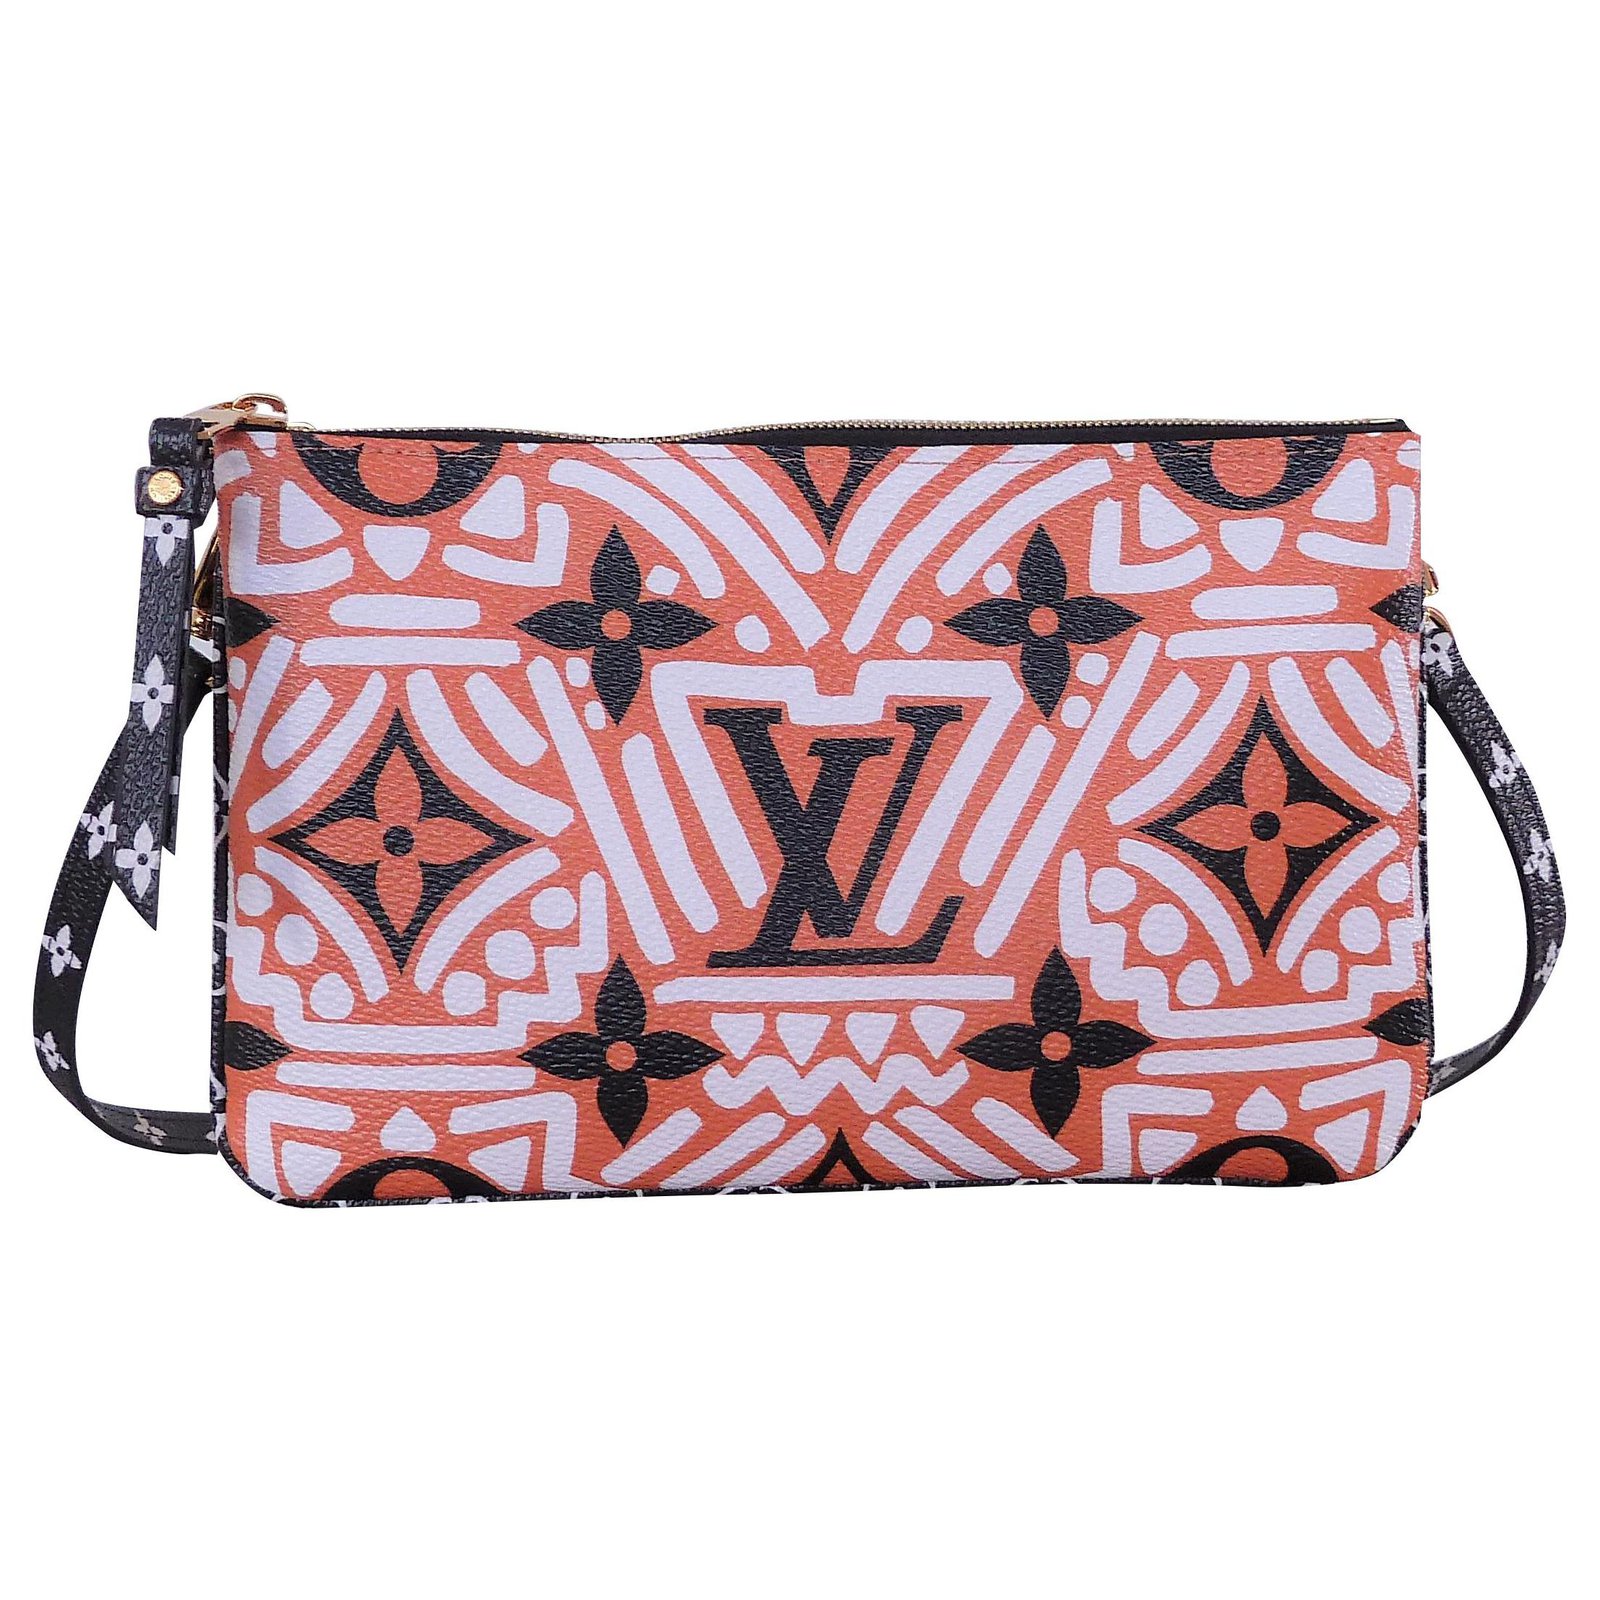 Handbags Louis Vuitton Louis Vuitton, Limited Edition Crafty Lined Zip Pouch.